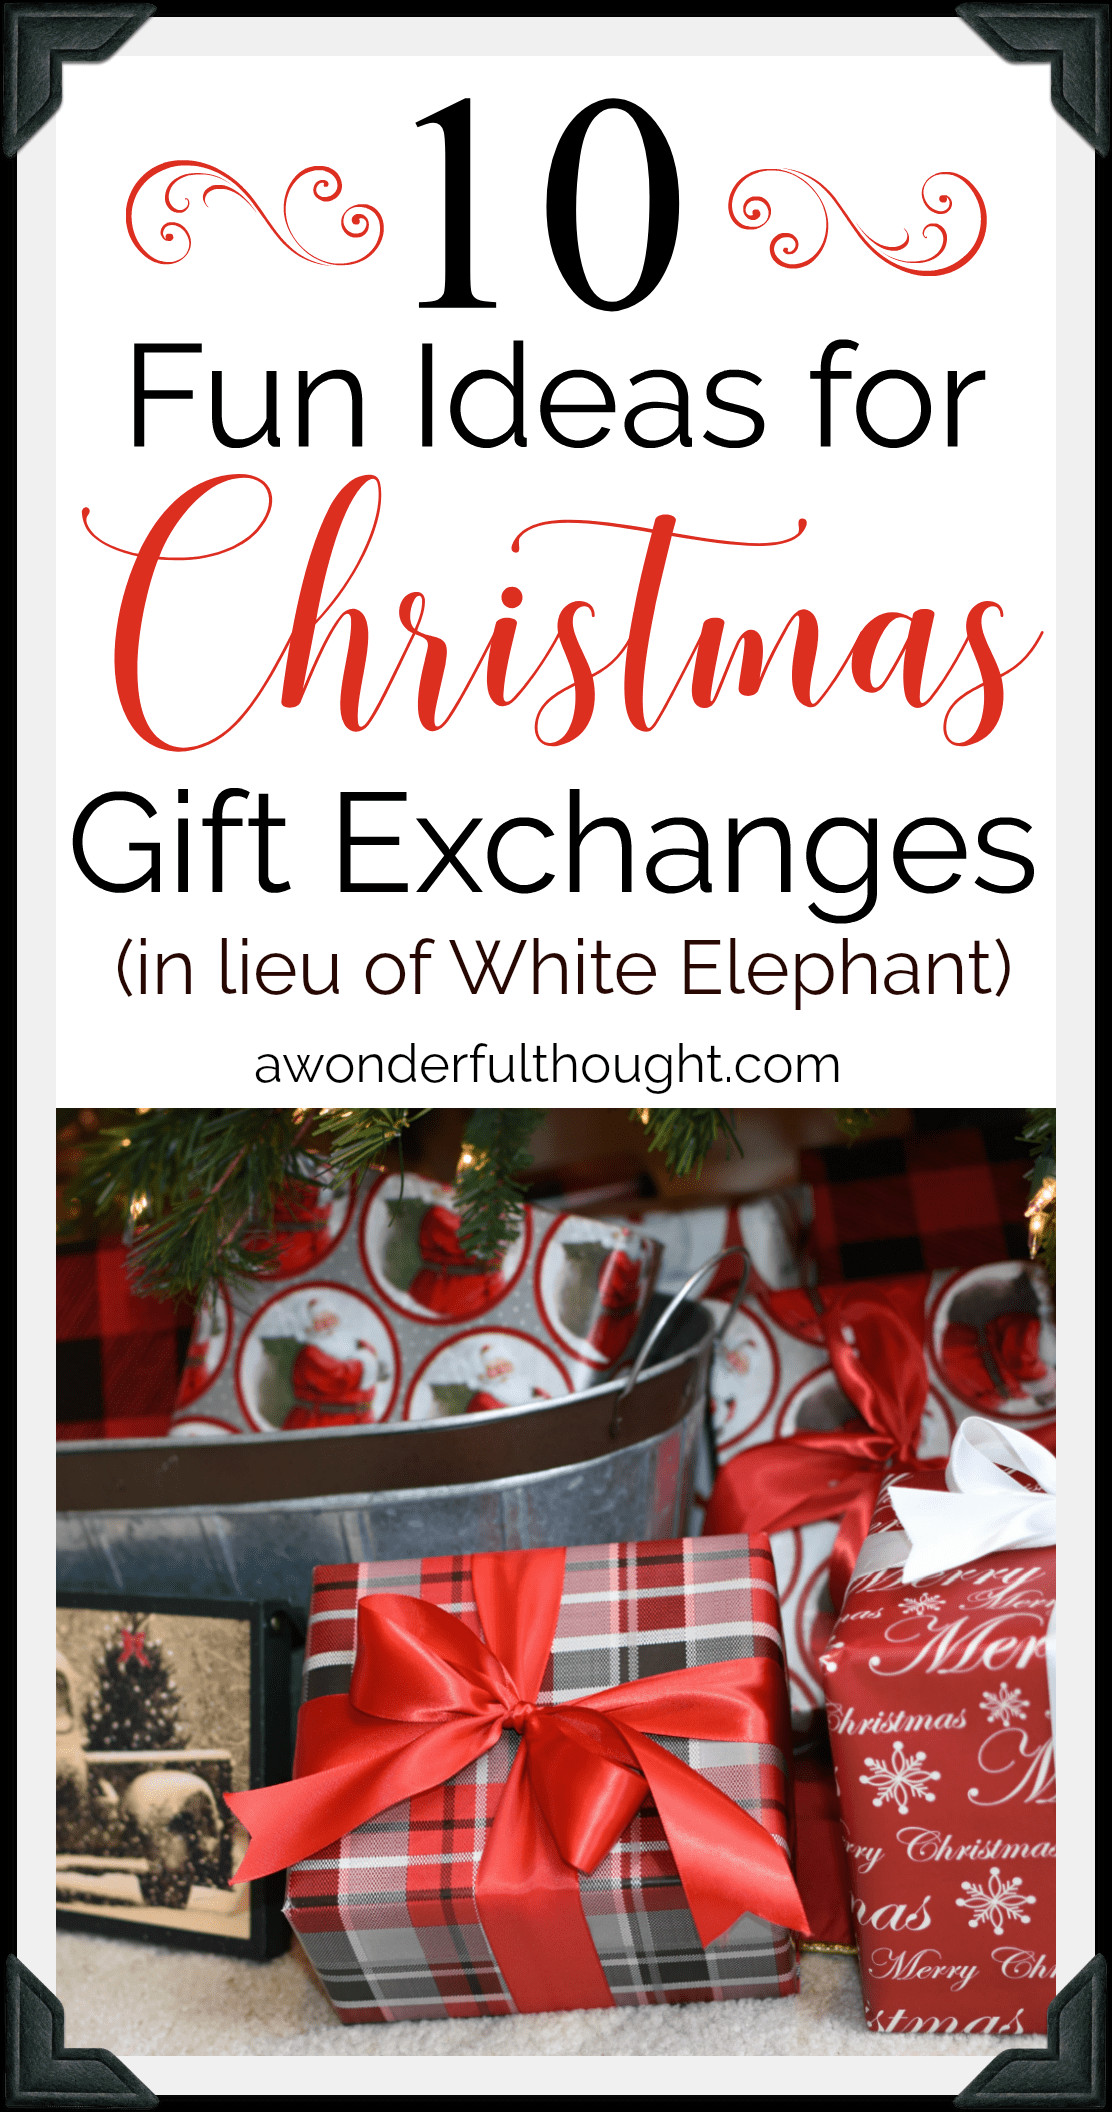 Holiday Party Gift Exchange Ideas
 Christmas Gift Exchange Ideas A Wonderful Thought